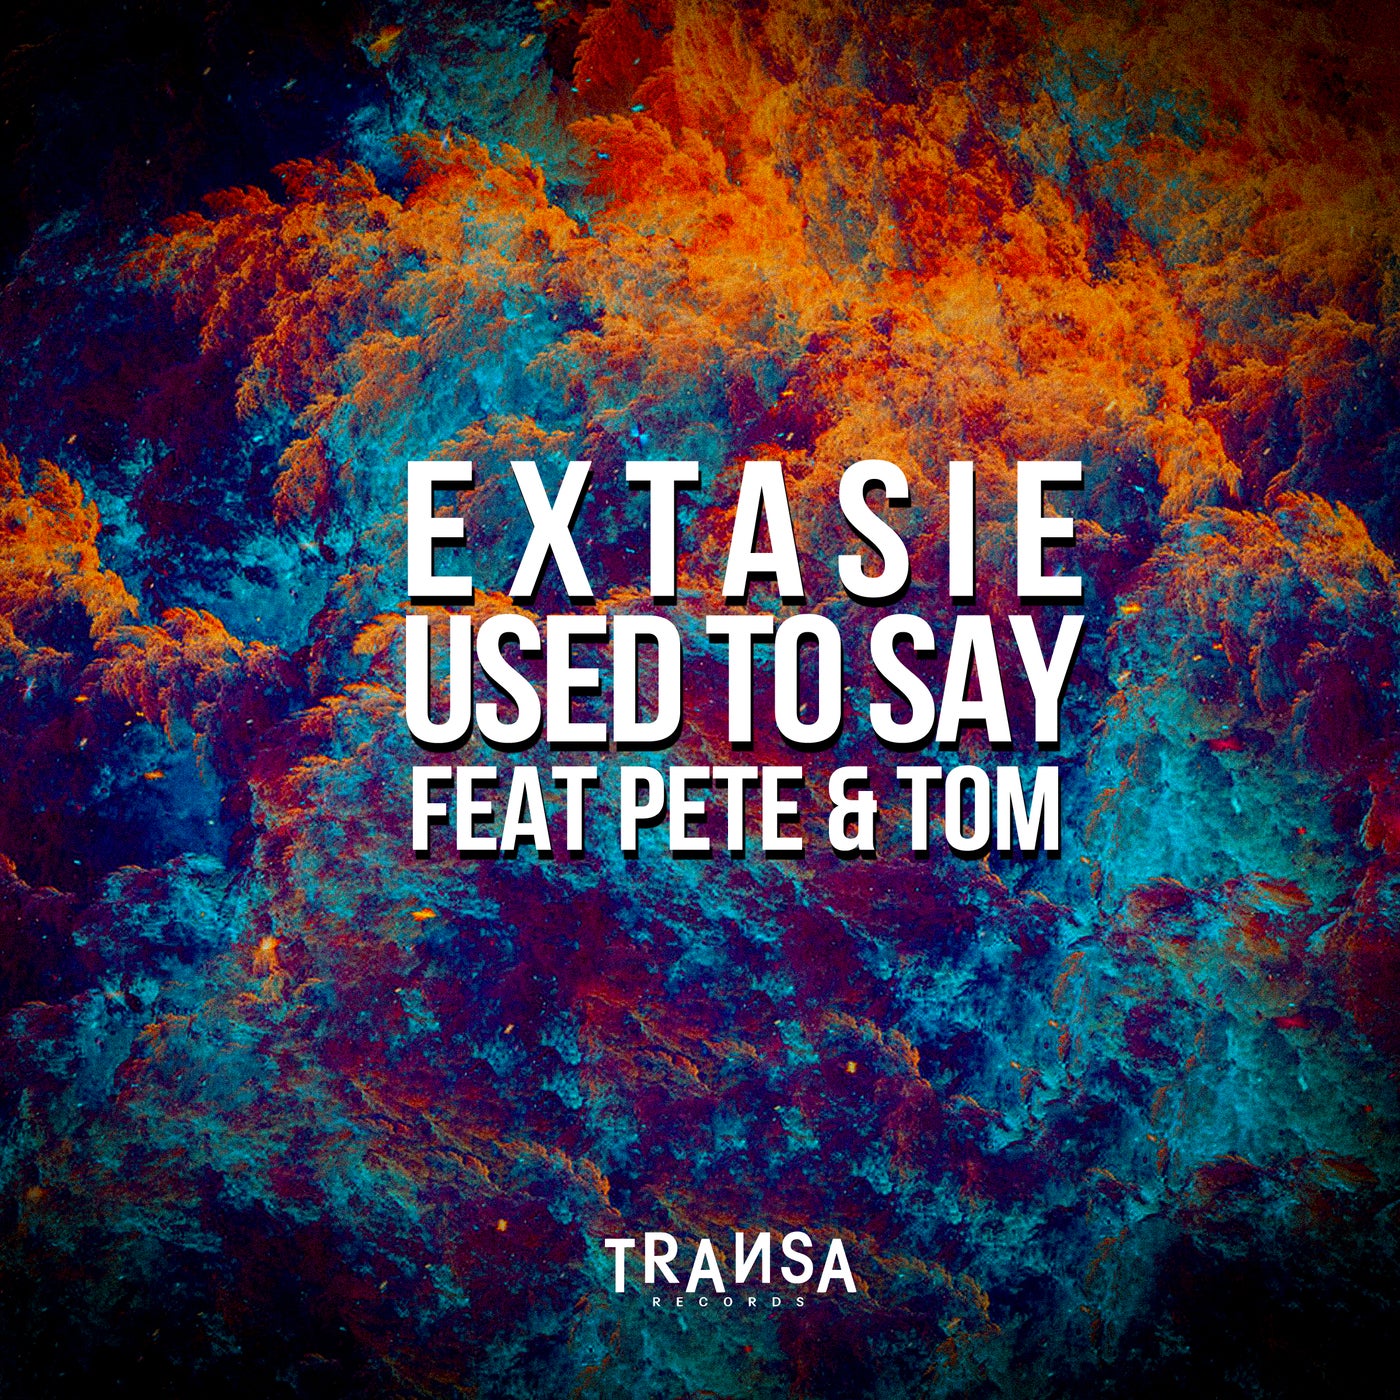 Used to Say Feat Pete & Tom